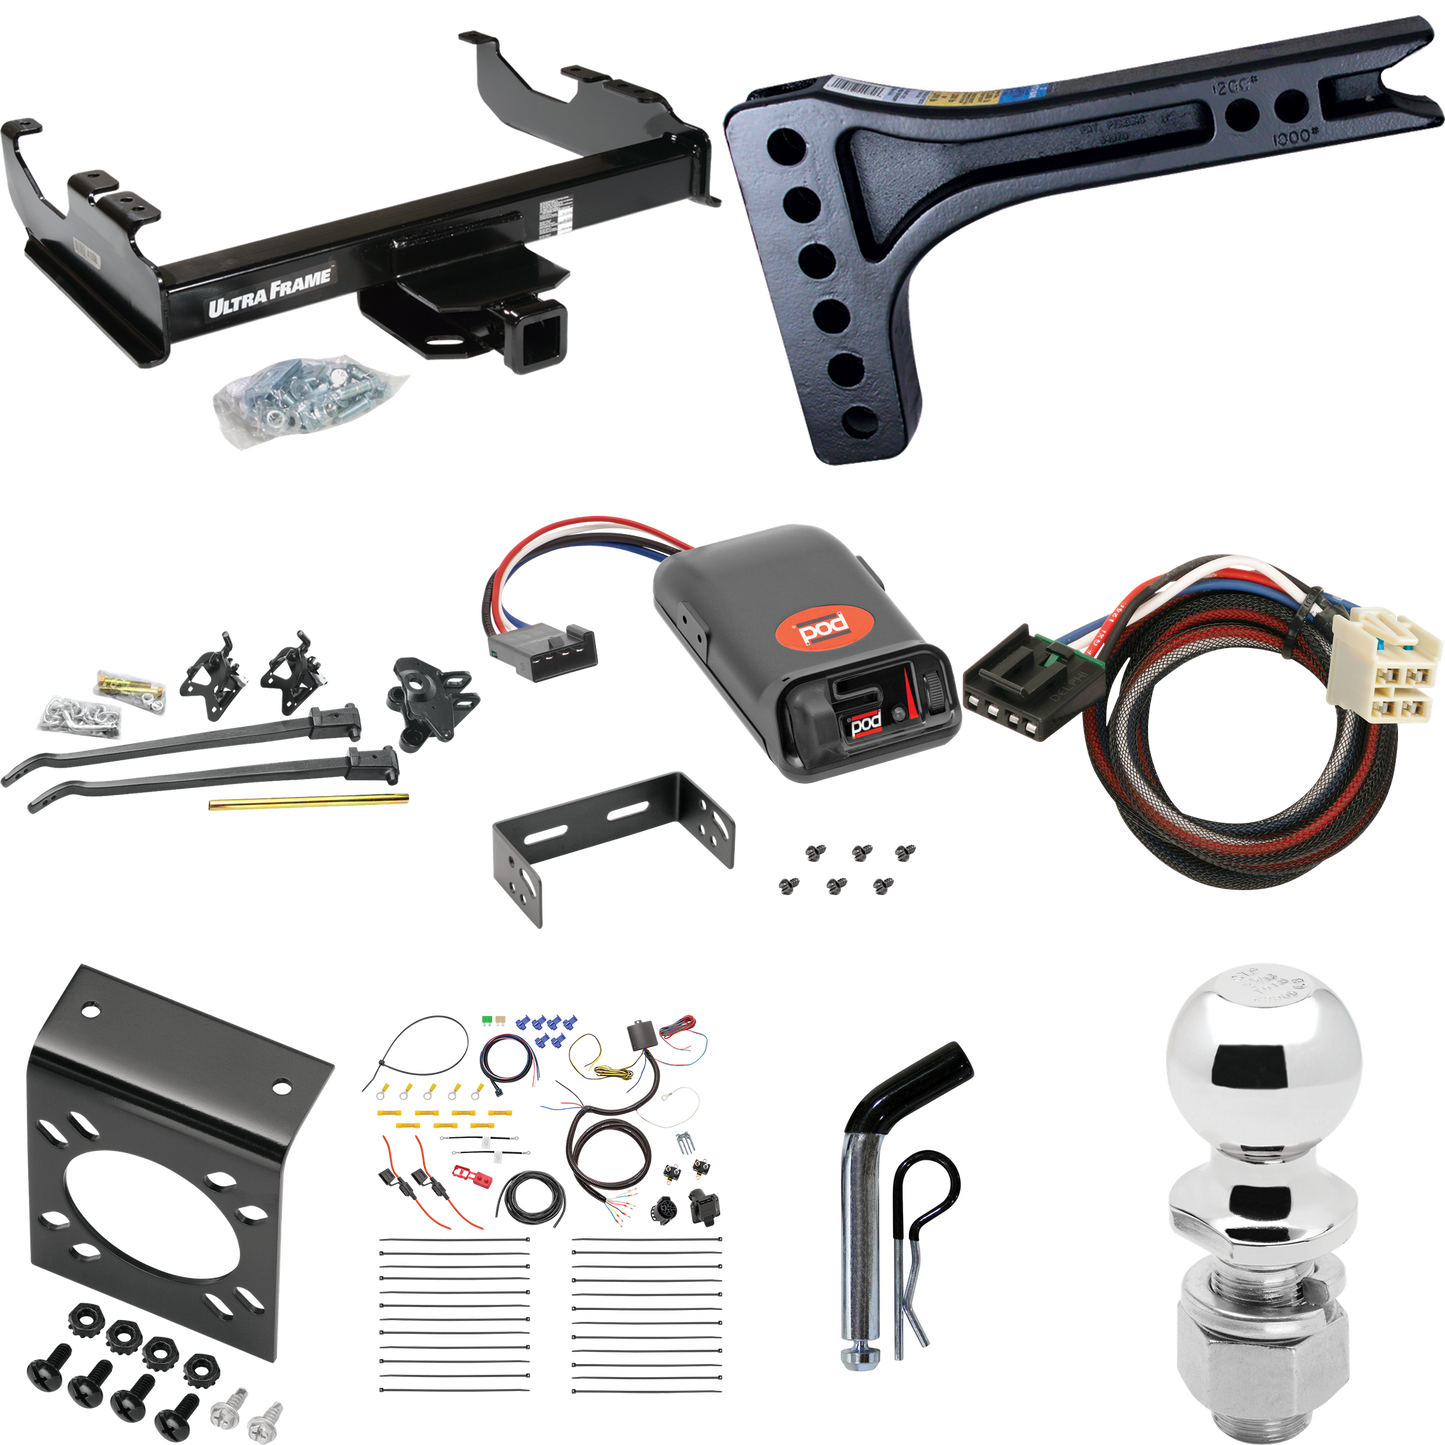 Fits 2015-2019 GMC Sierra 3500 HD Trailer Hitch Tow PKG w/ 15K Trunnion Bar Weight Distribution Hitch + Pin/Clip + 2-5/16" Ball + Pro Series POD Brake Control + Plug & Play BC Adapter + 7-Way RV Wiring (For Cab & Chassis, w/34" Wide Frames Models) By